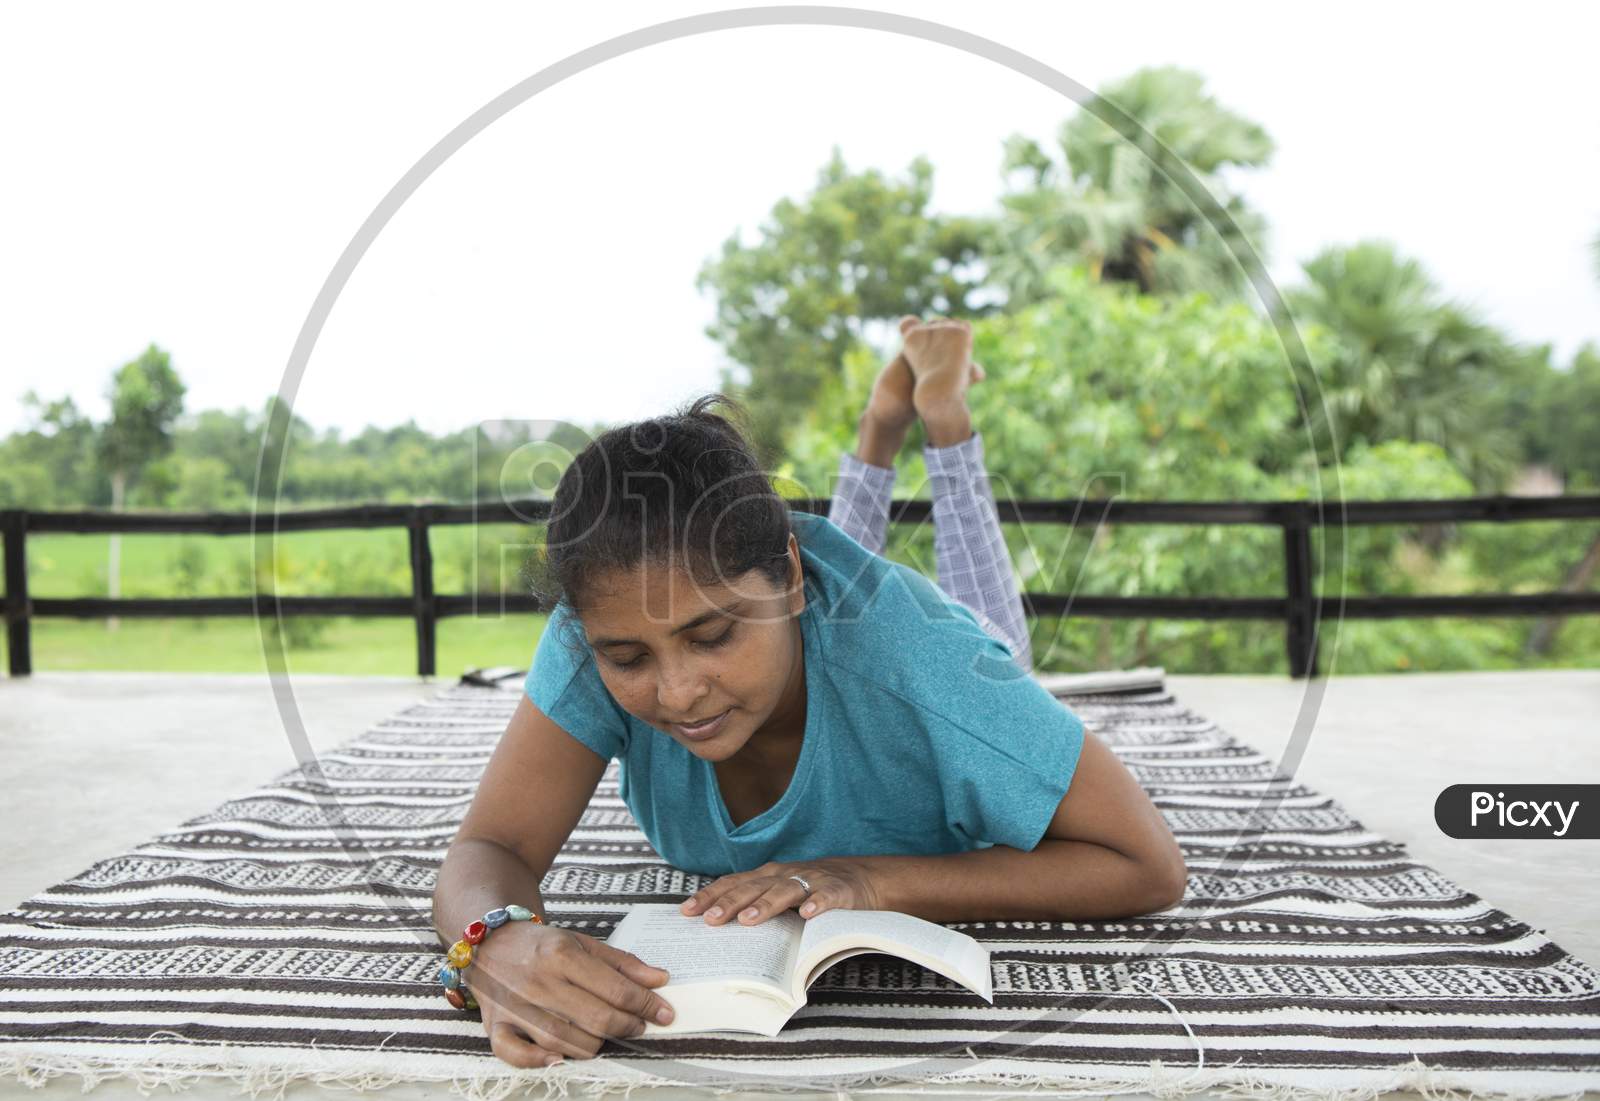 A Lady In Blue T-Shirt Reads A Book At A Peaceful Location On A Striped Mattress Surrounded By Greenery